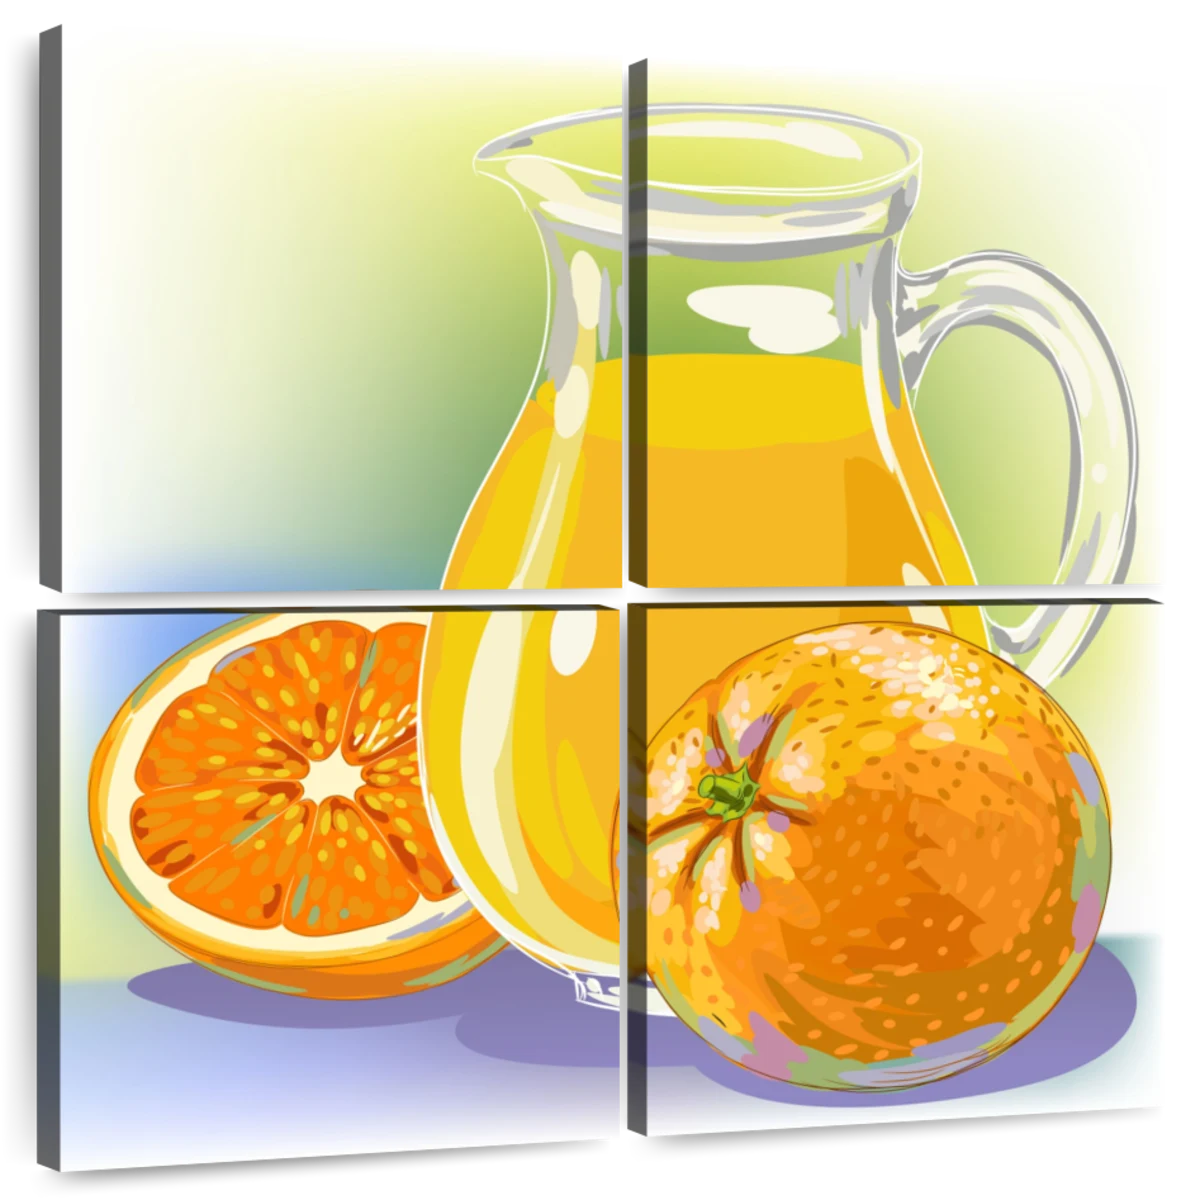 https://cdn.shopify.com/s/files/1/1568/8443/products/jho_es_2ia_layout_4_square_orange-juice-pitcher-4-piece-wall-art.webp?v=1669132856